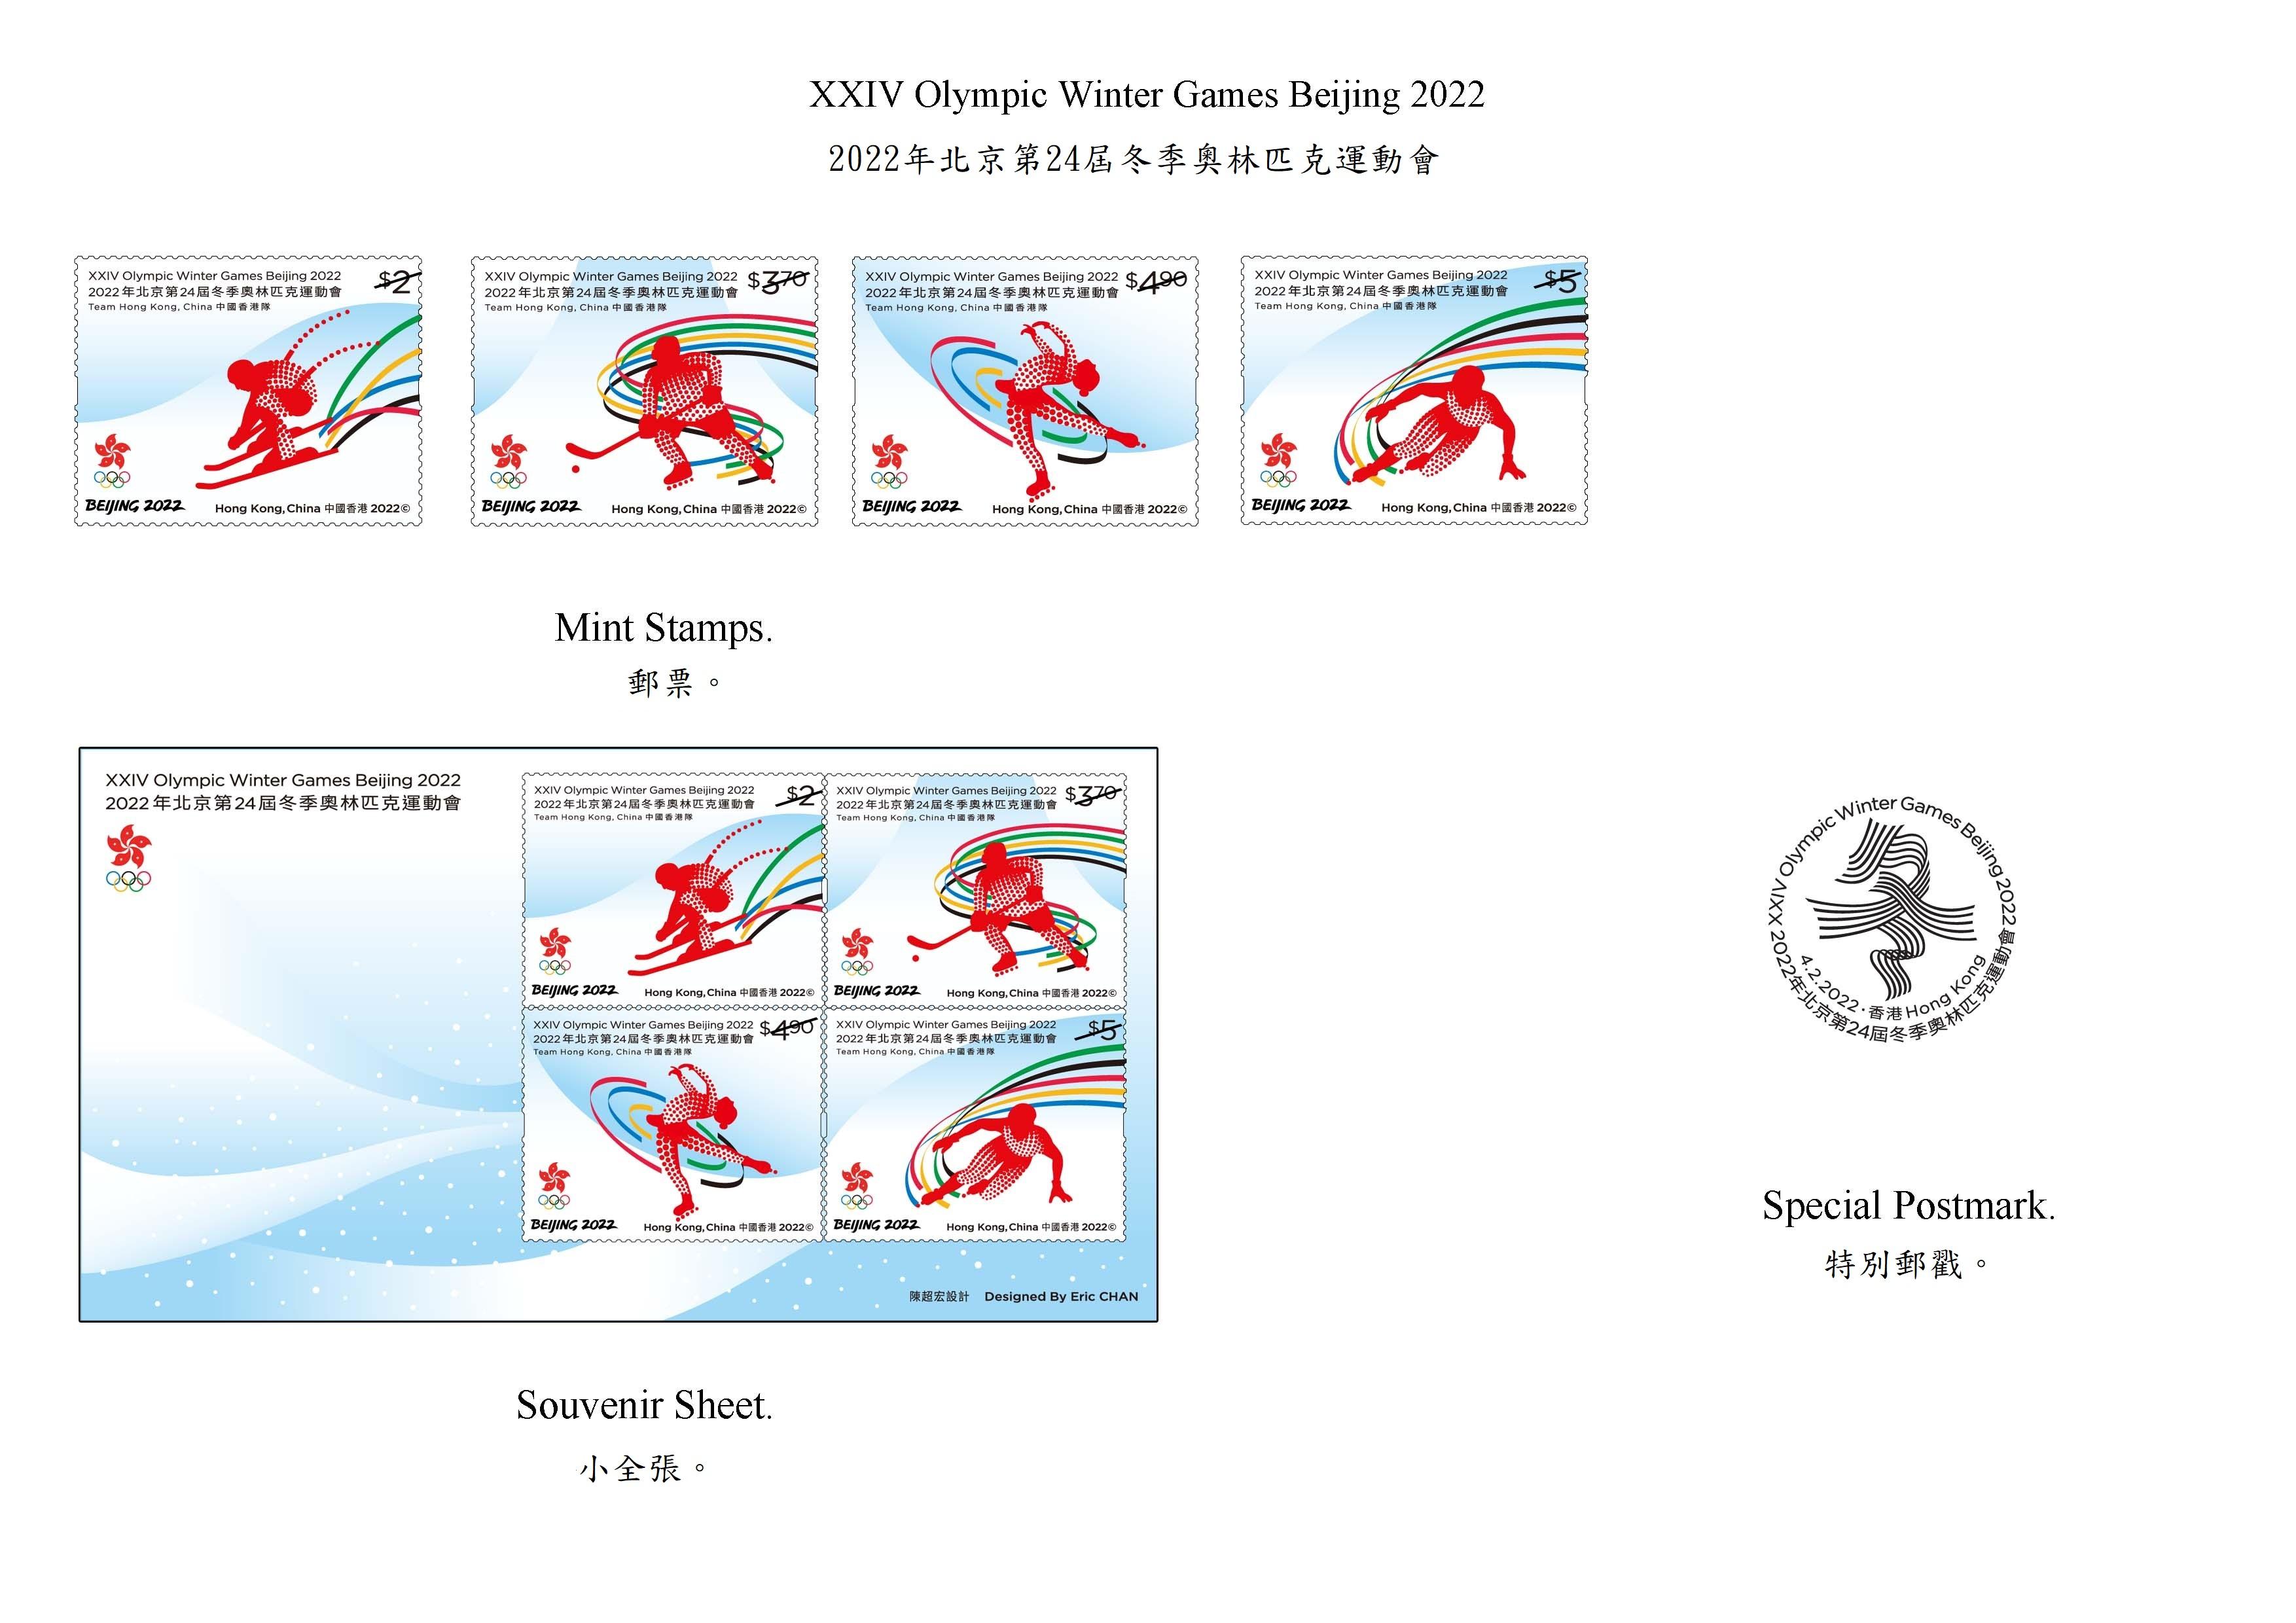 Hongkong Post will launch a special stamps issue and associated philatelic products with the theme "XXIV Olympic Winter Games Beijing 2022" on February 4 (Friday). Photo shows the mint stamps, souvenir sheet and the special postmark.